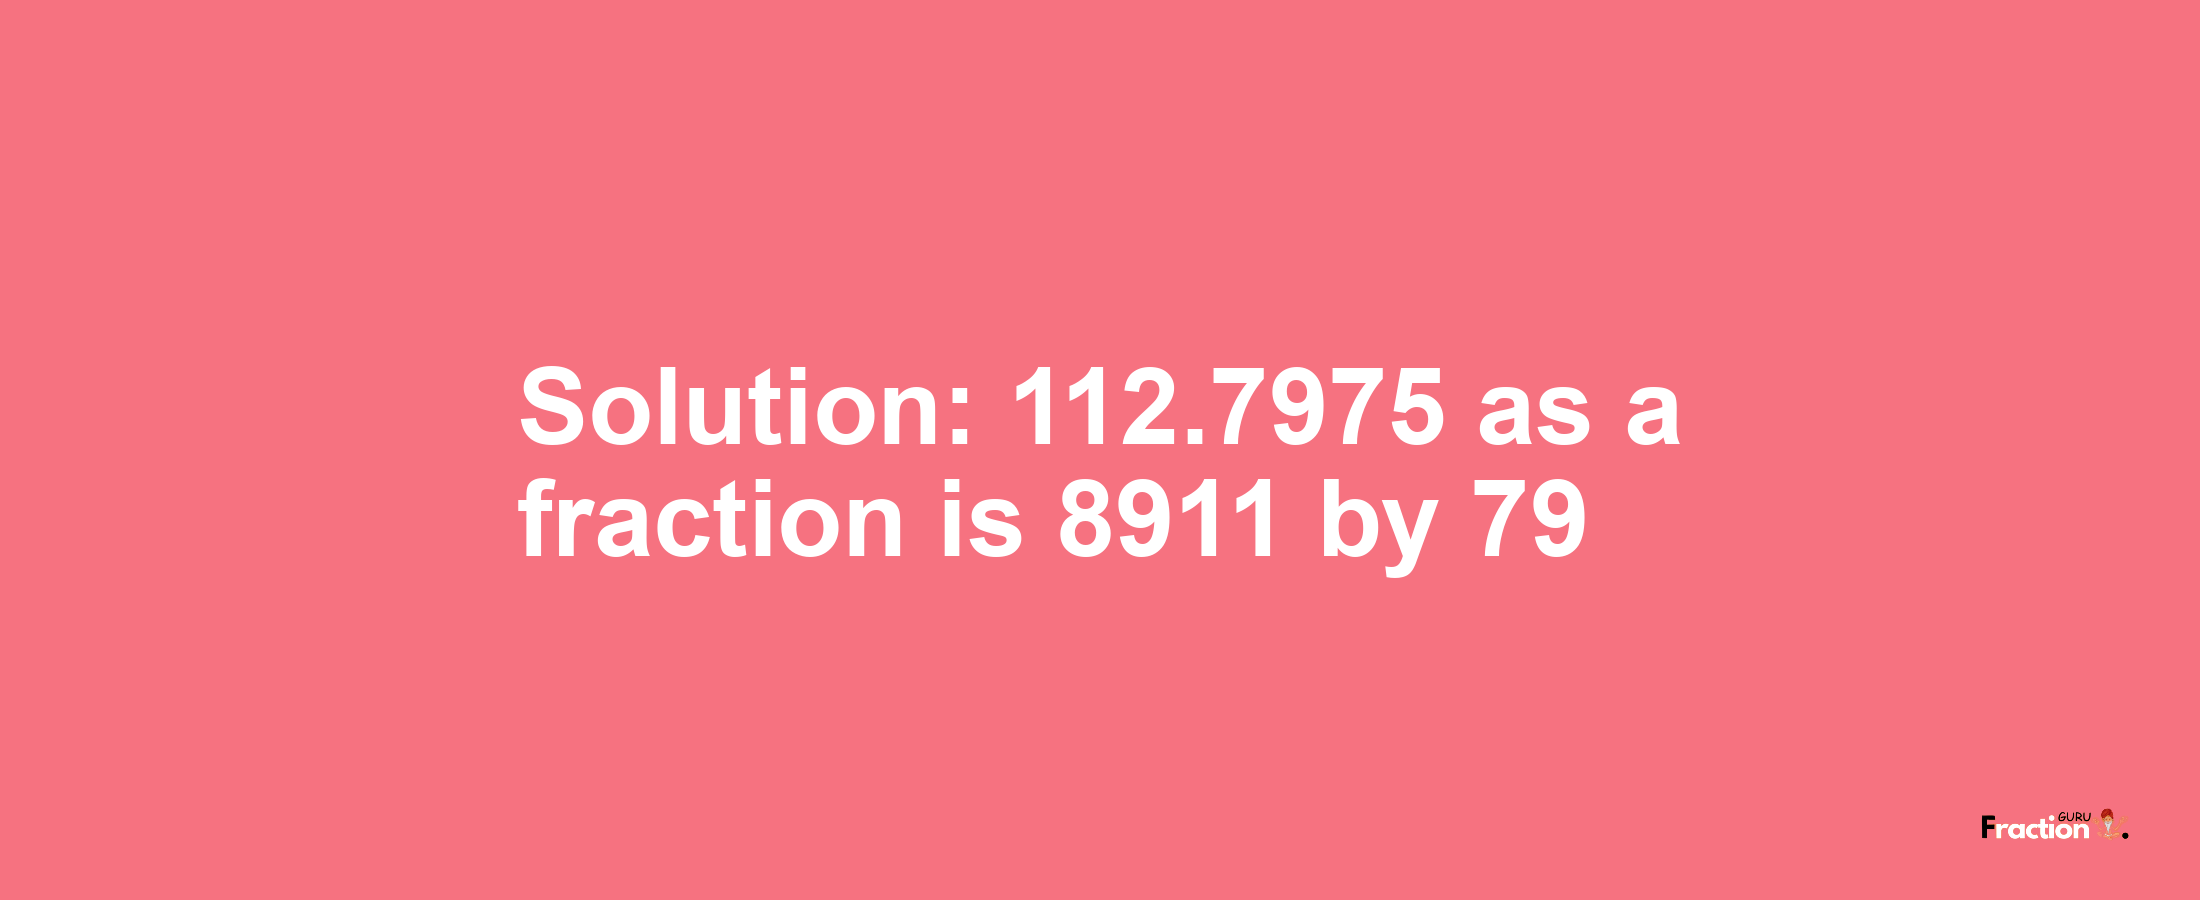 Solution:112.7975 as a fraction is 8911/79